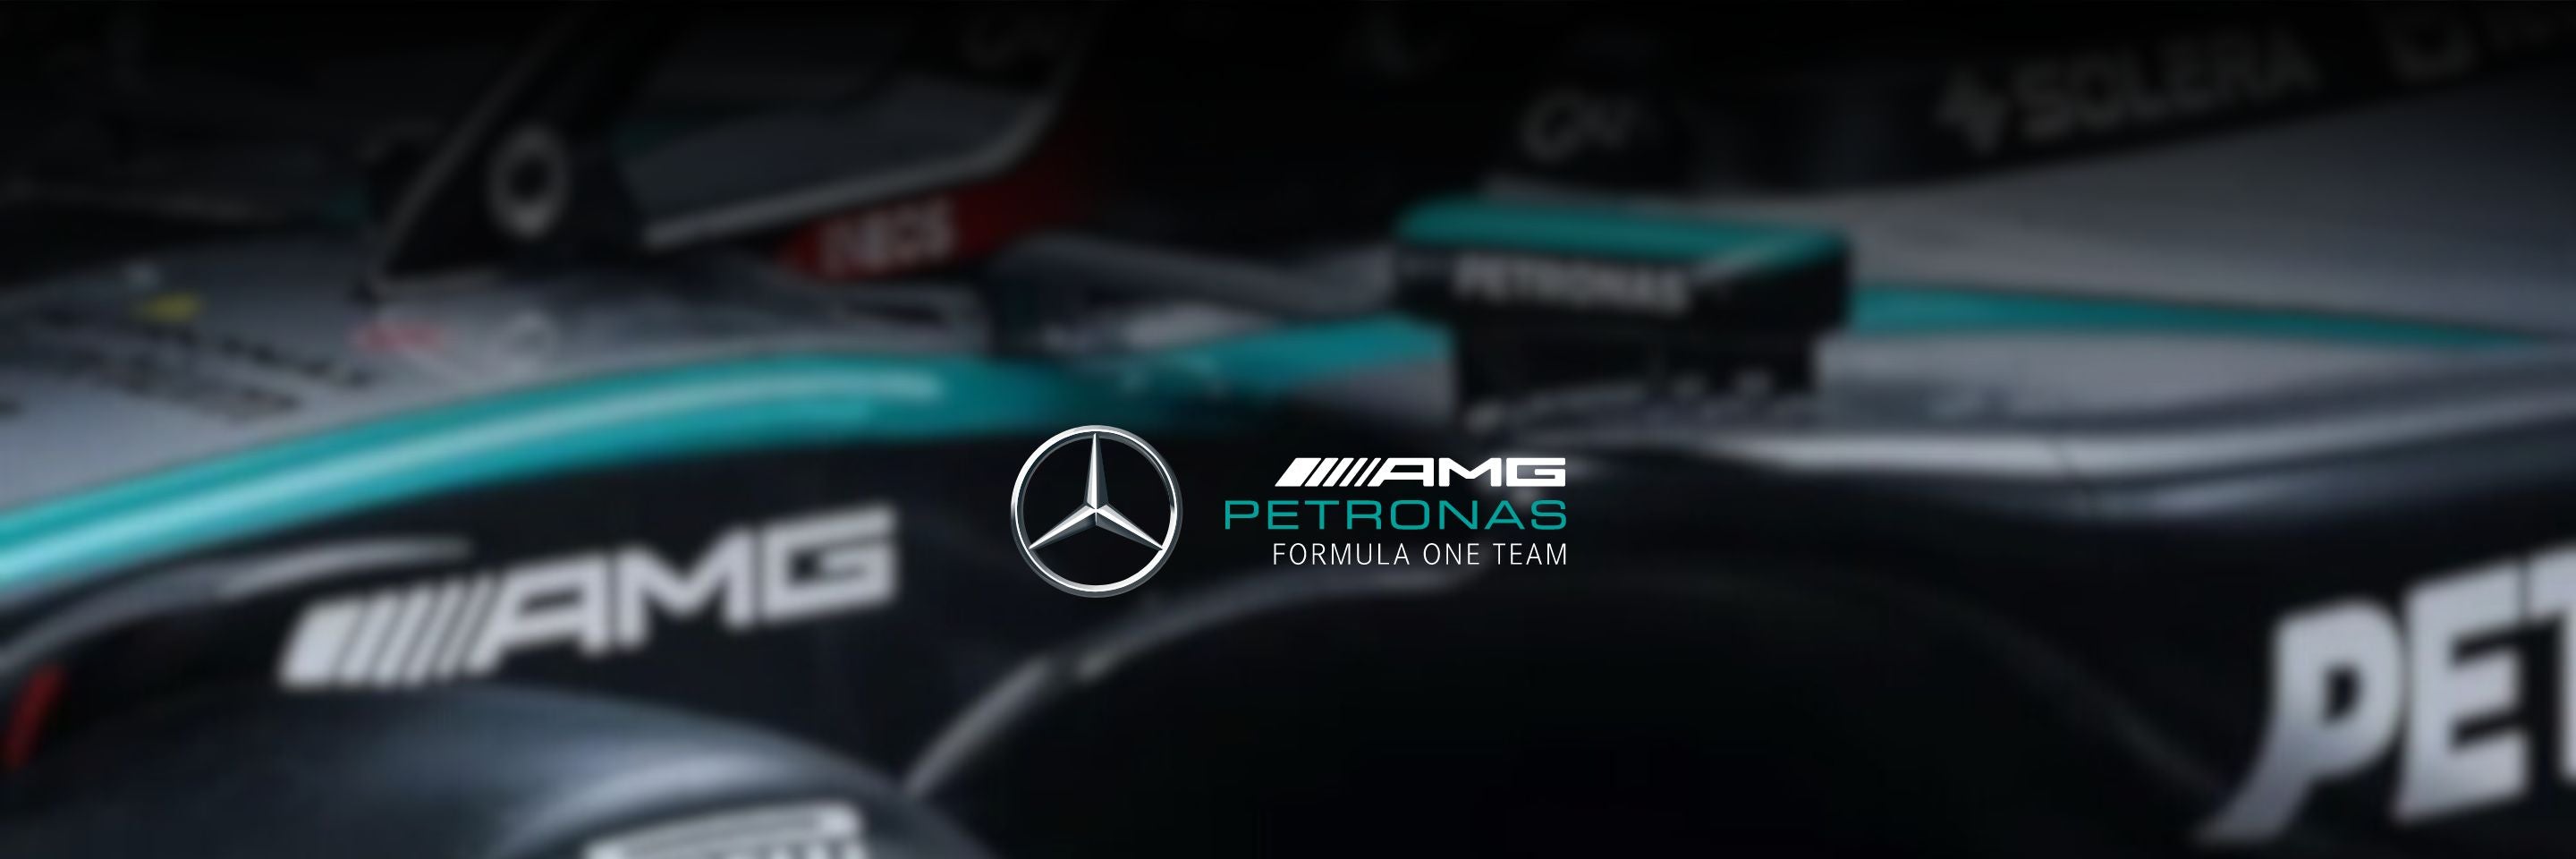 Mercedes-AMG Petronas F1 - F1 and Motorpsort Offficial Merchandise - Fueler store